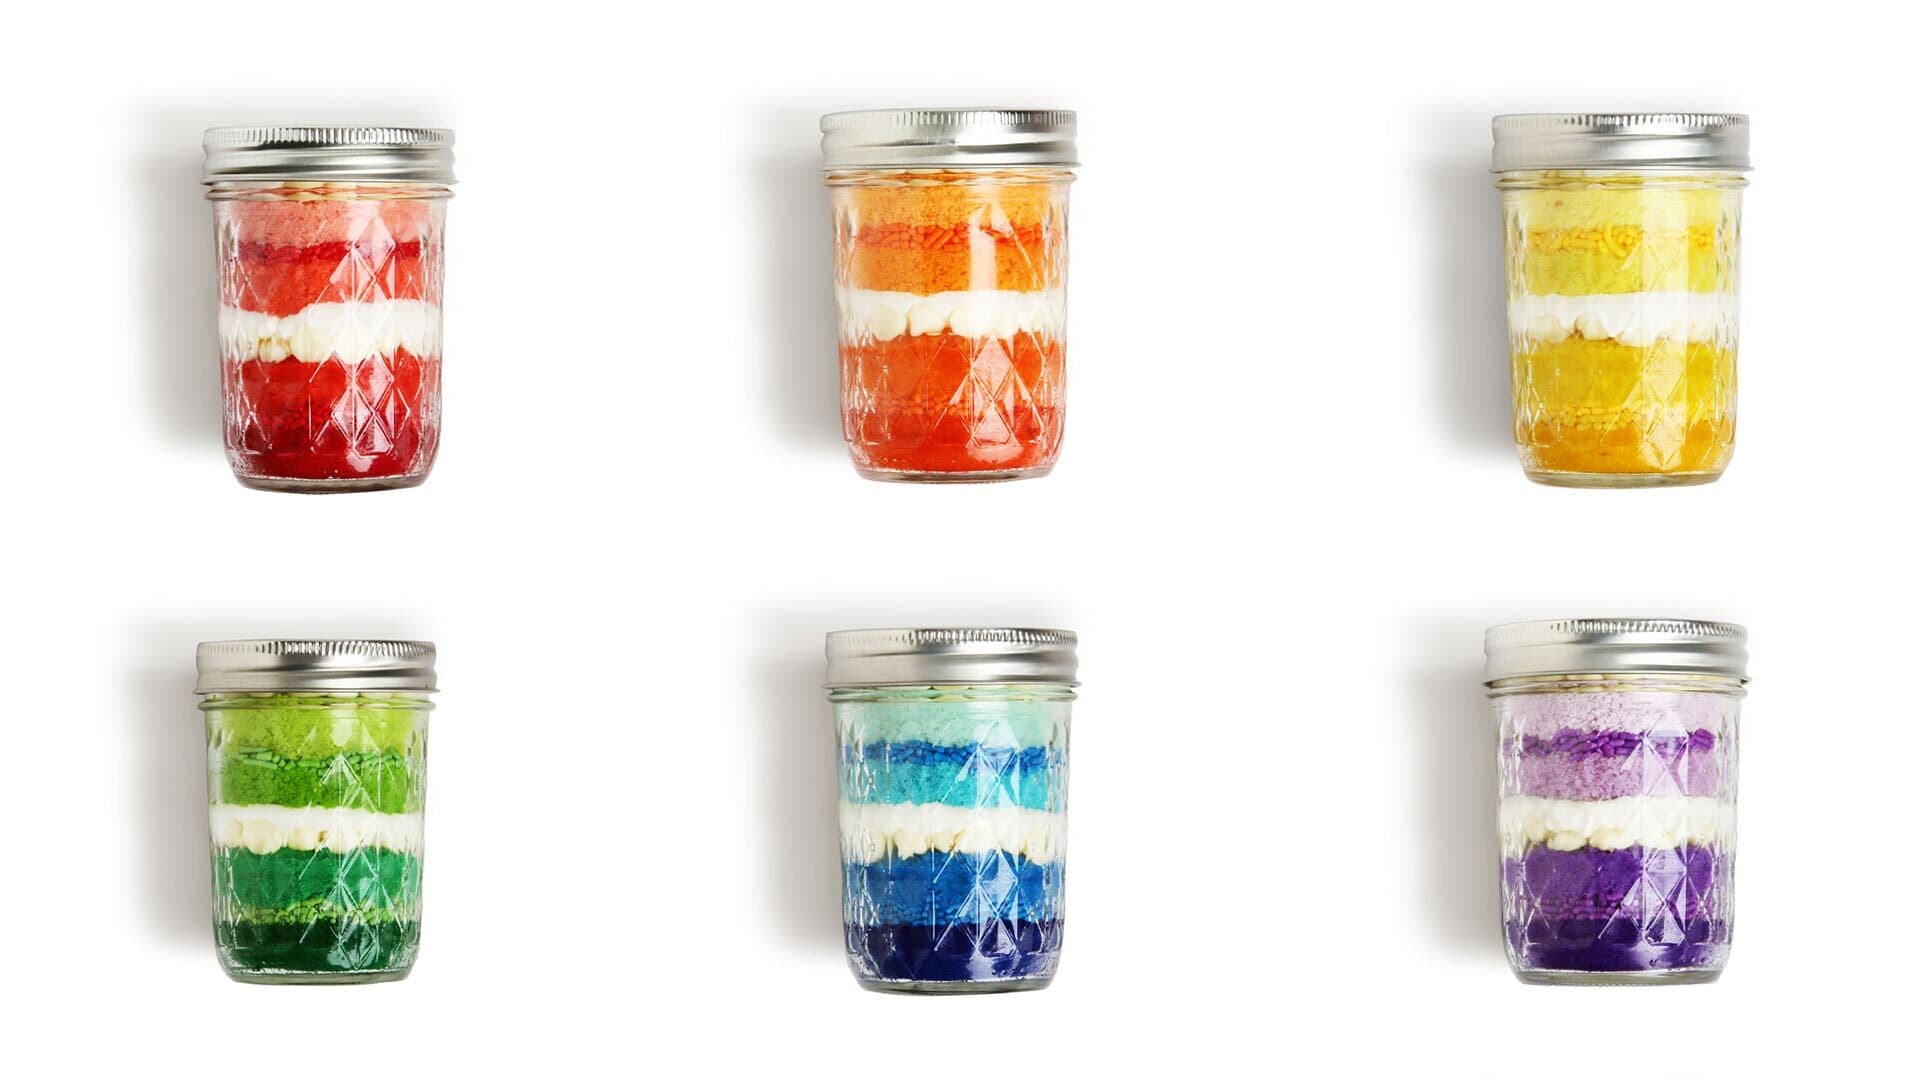 Jars of layered desserts from Jars by Dani